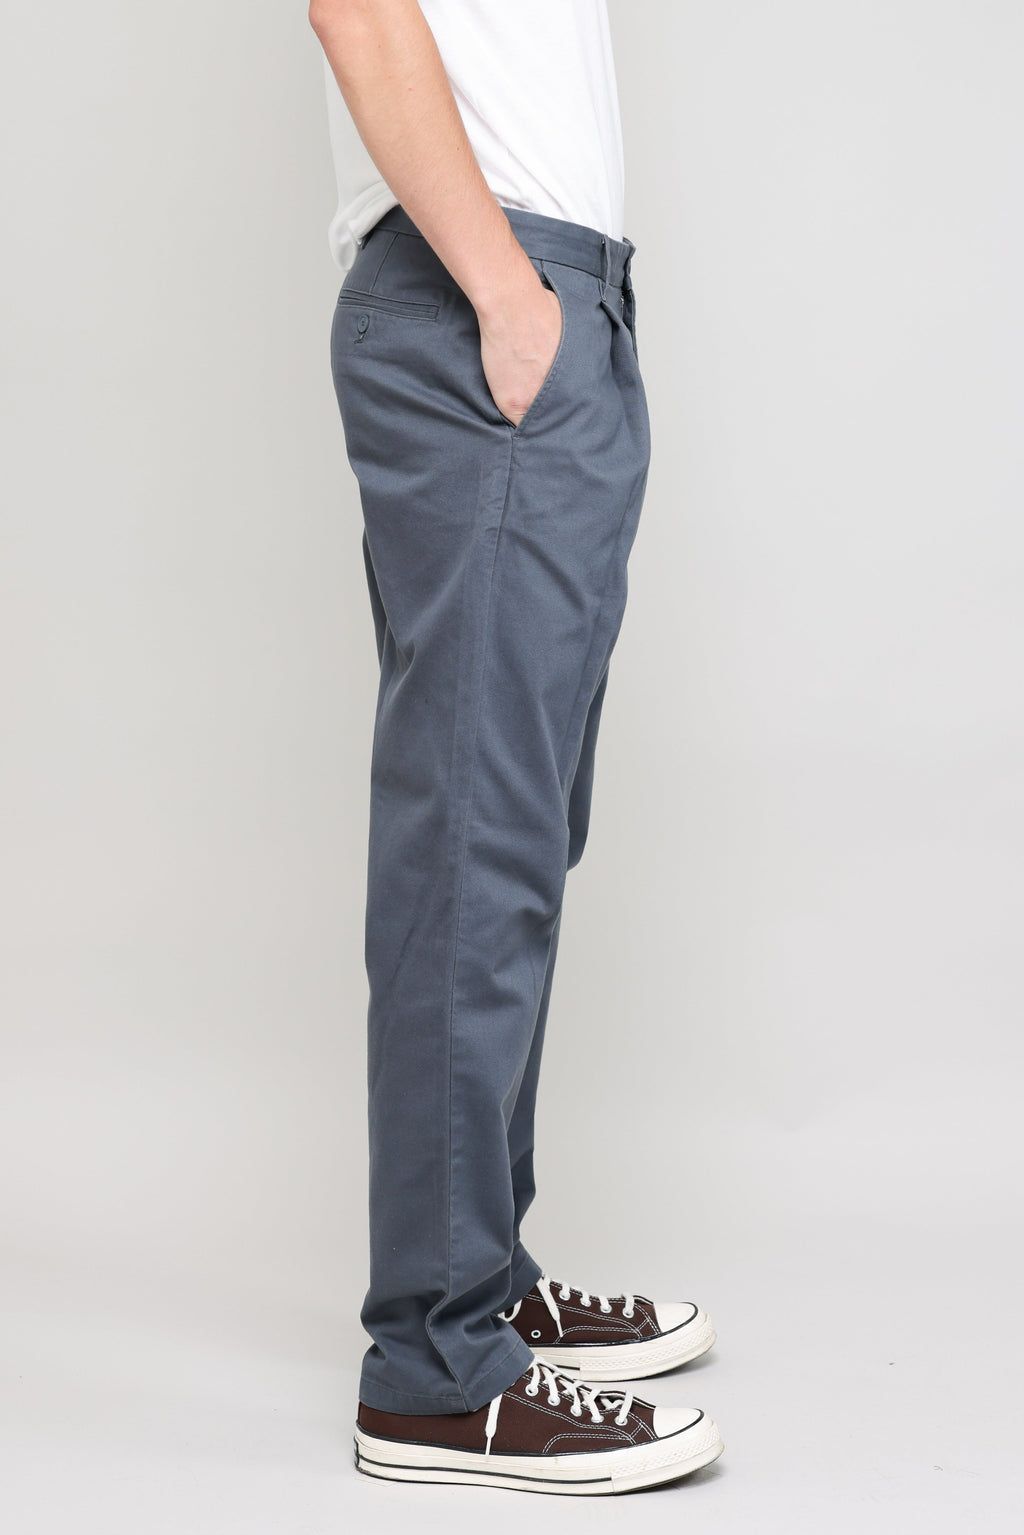 Pleated Chino Vintage French Drill in Blue Grey 04